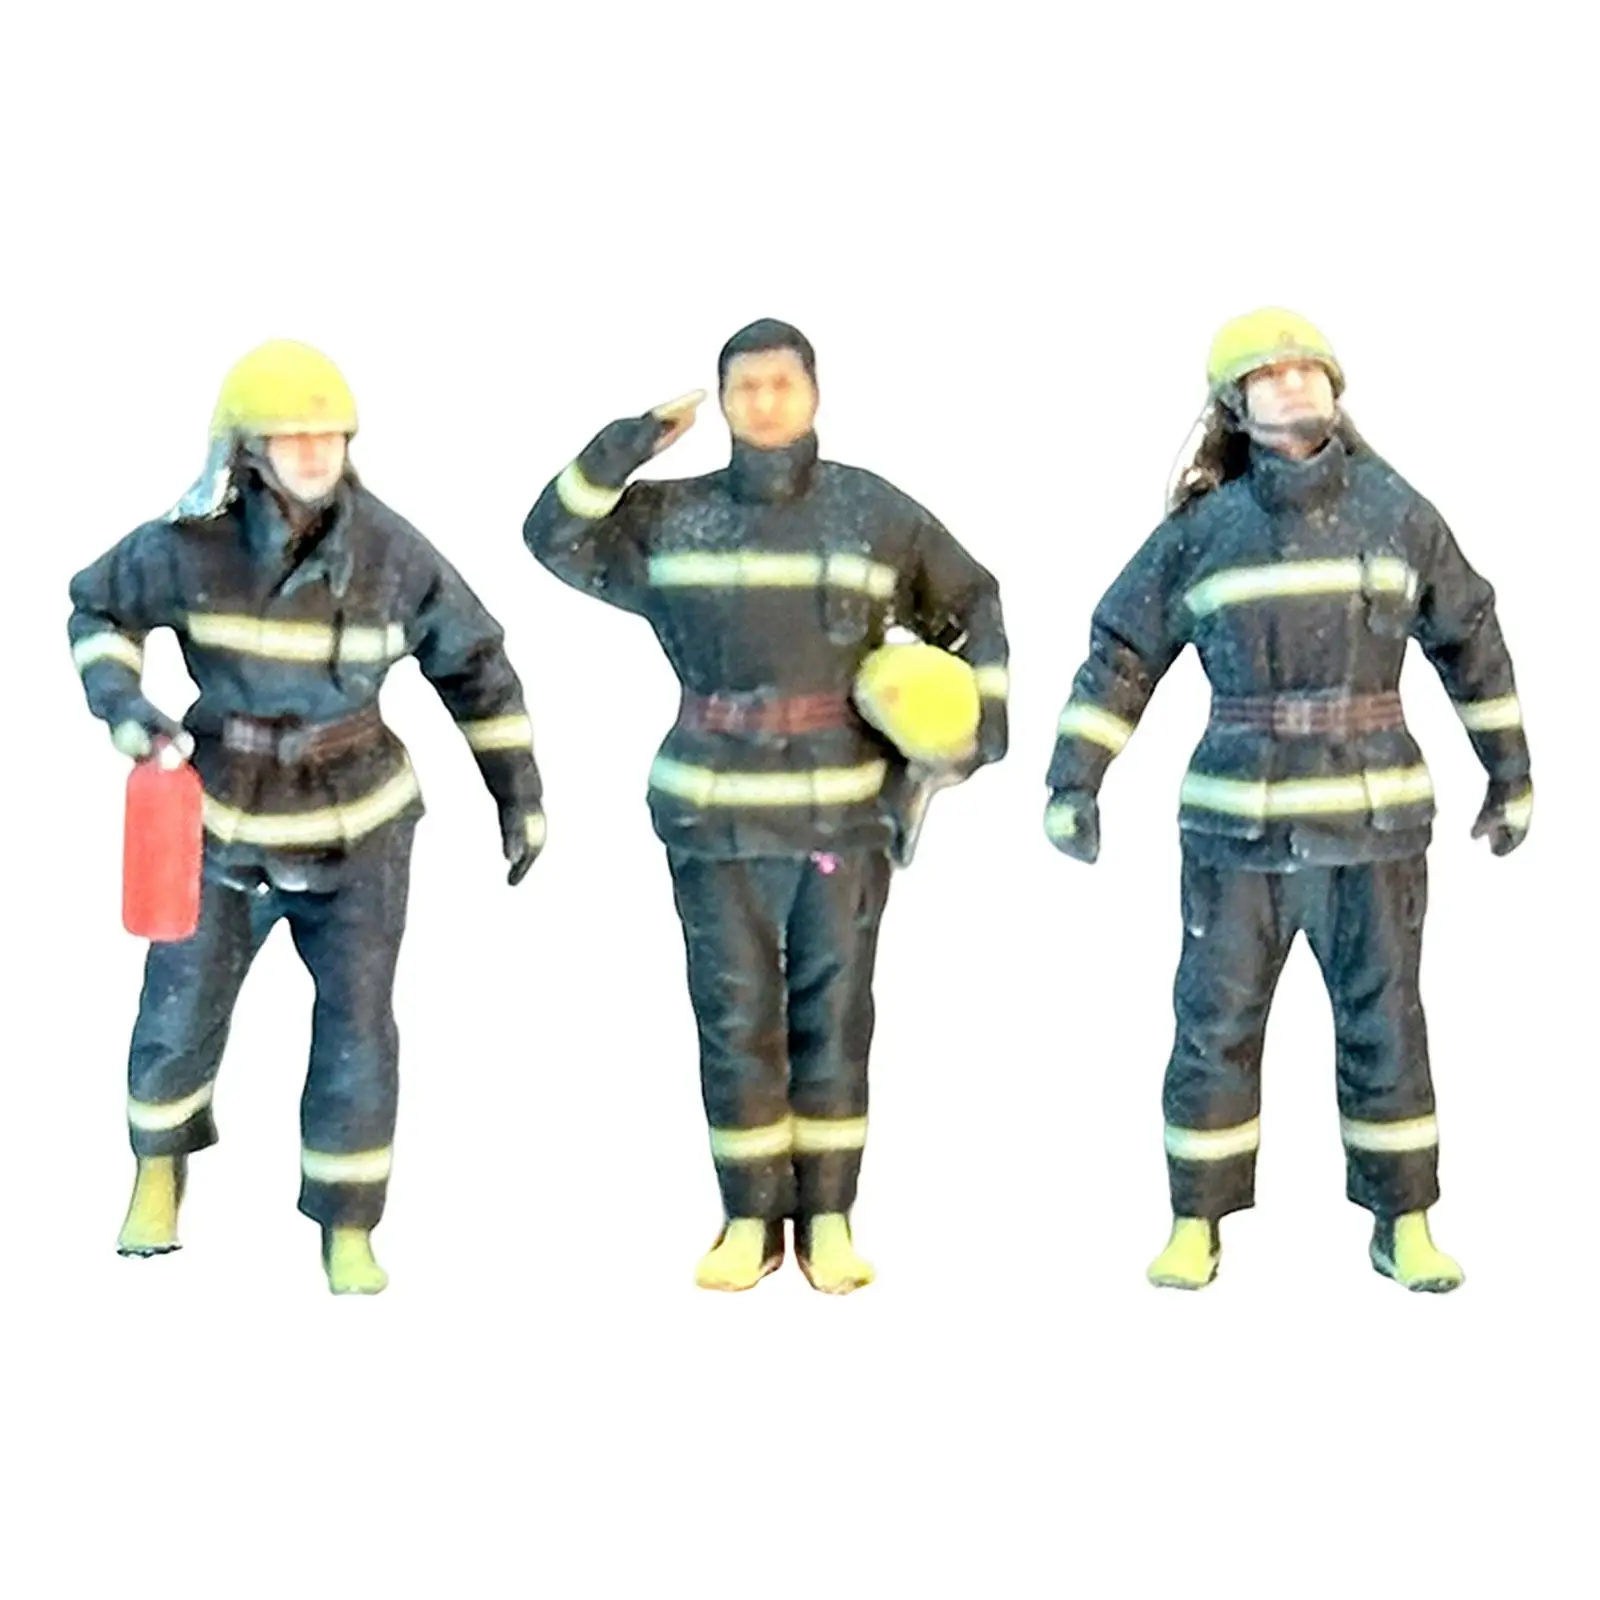 Miniature 1:64 Firefighter Figures Miniature Model Tiny People Model for Micro Landscapes Diorama Photography Props Layout Decor